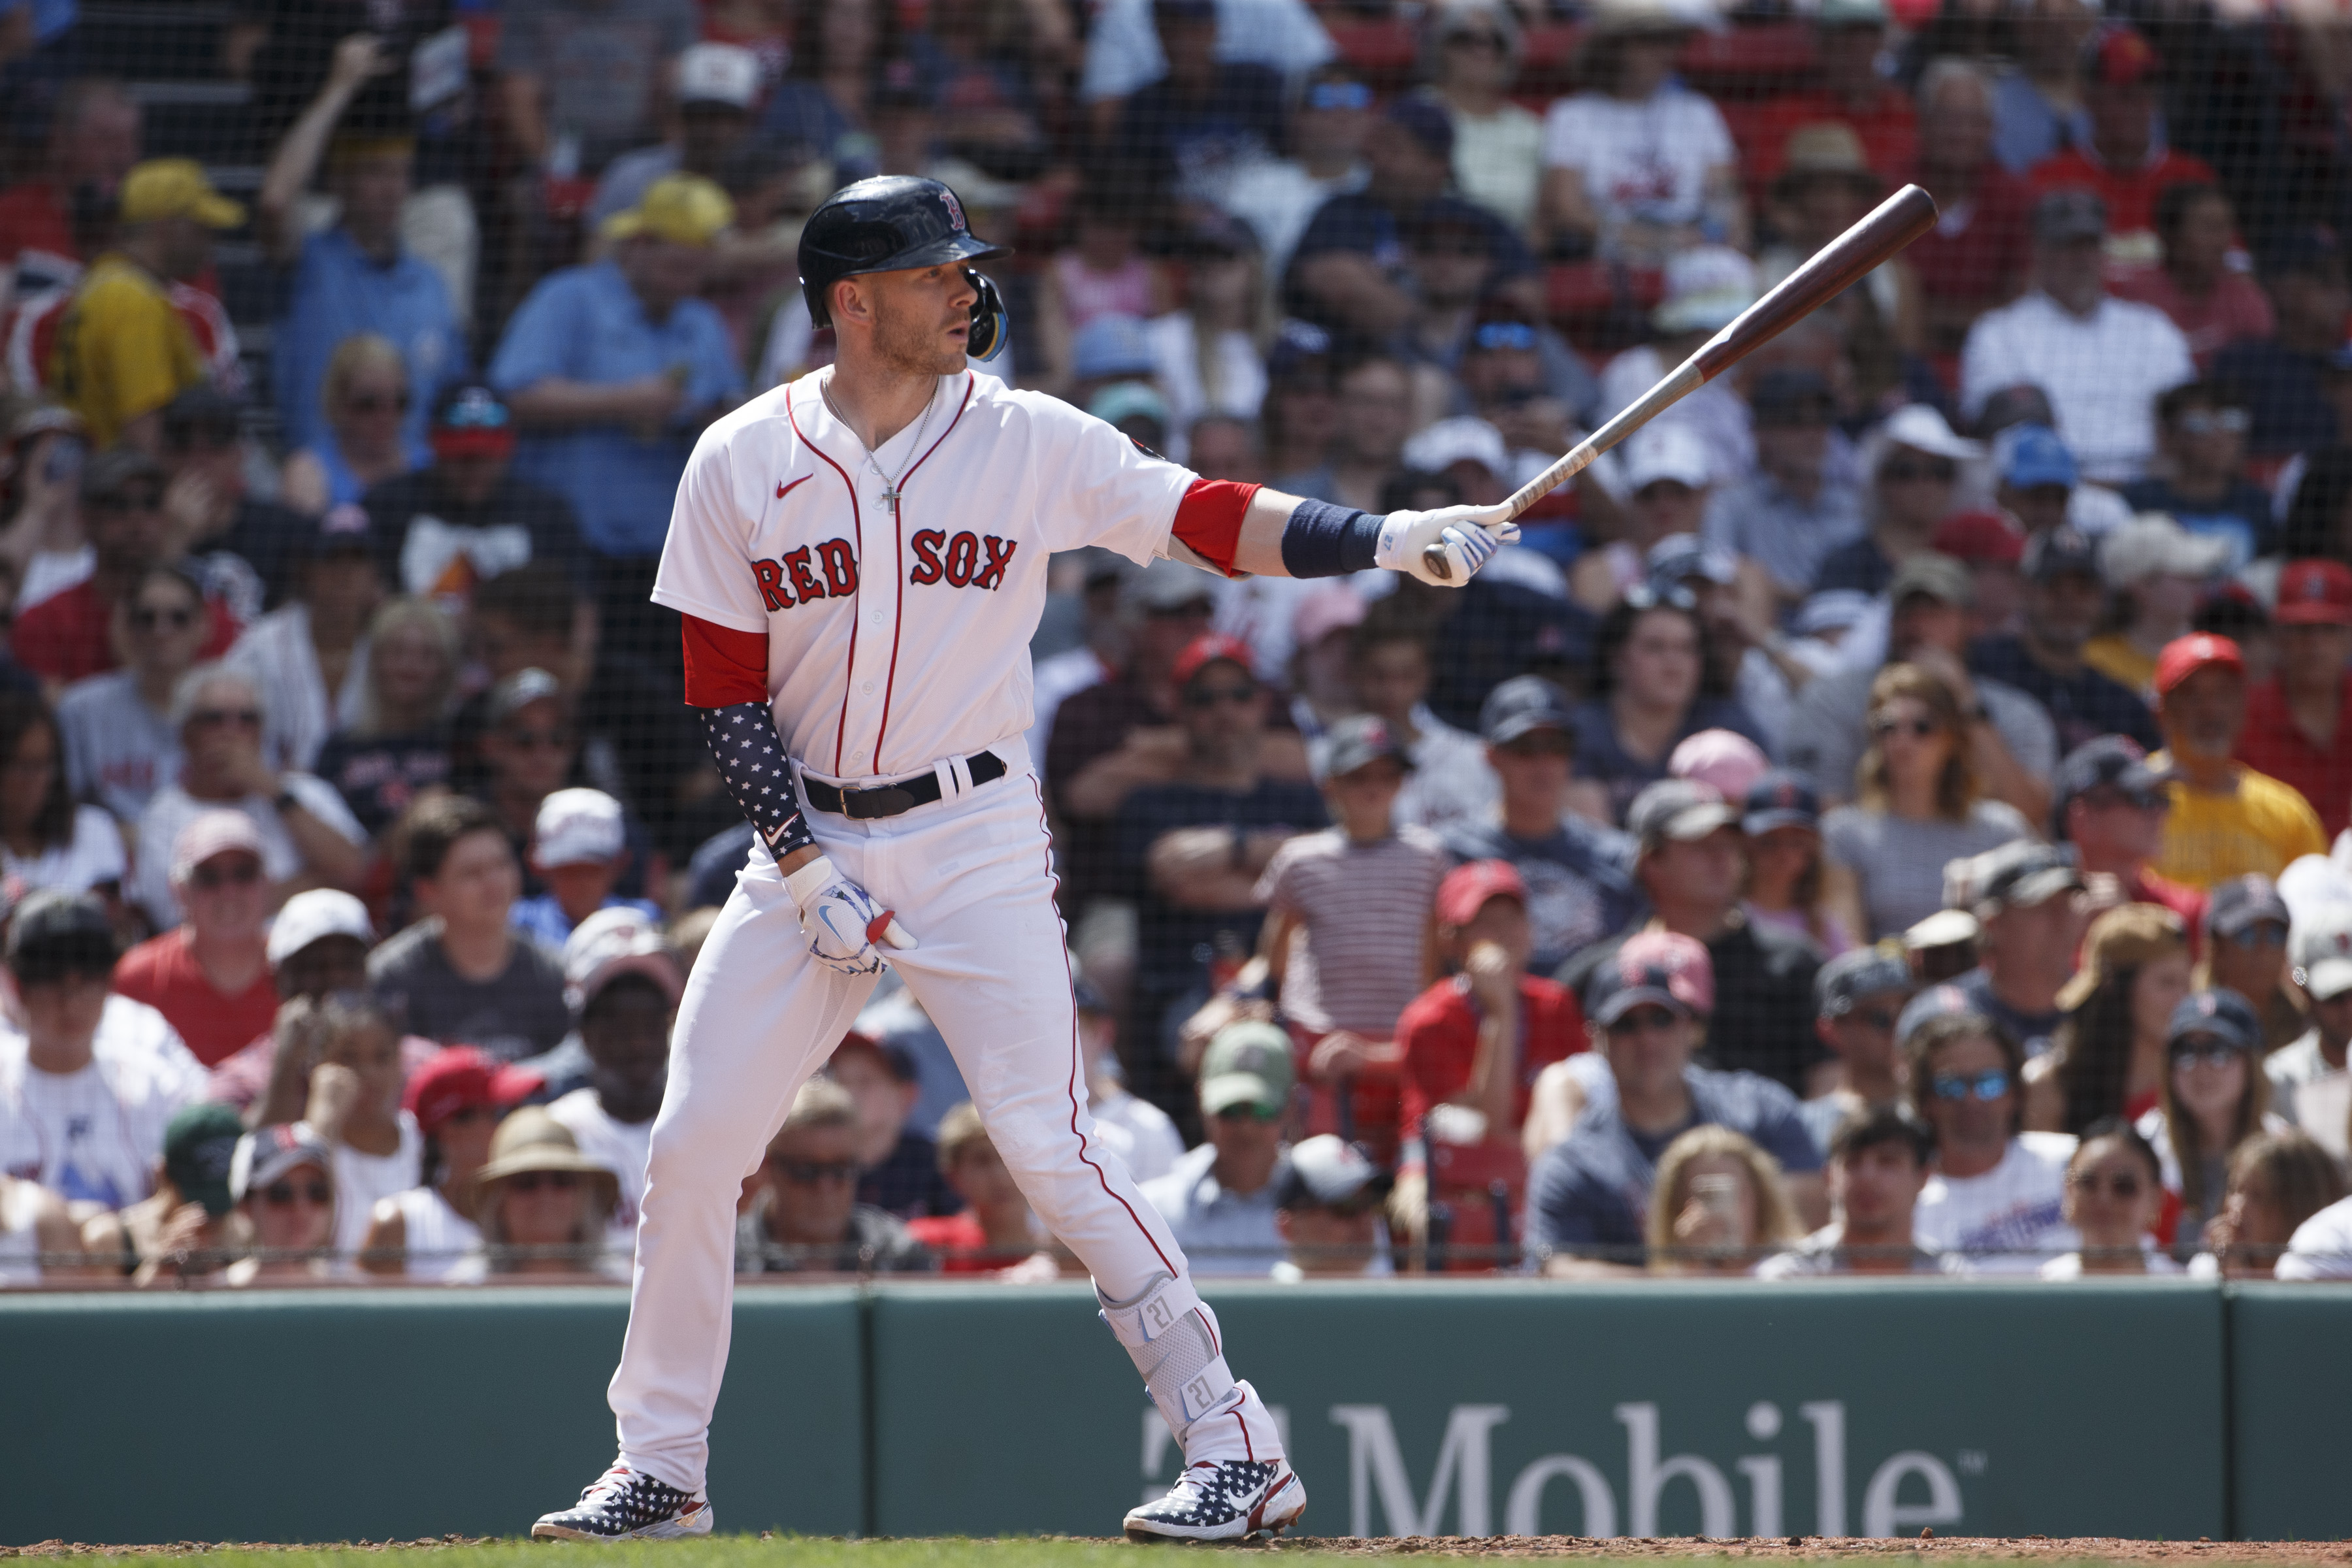 Boston Red Sox - How we're lining up tonight